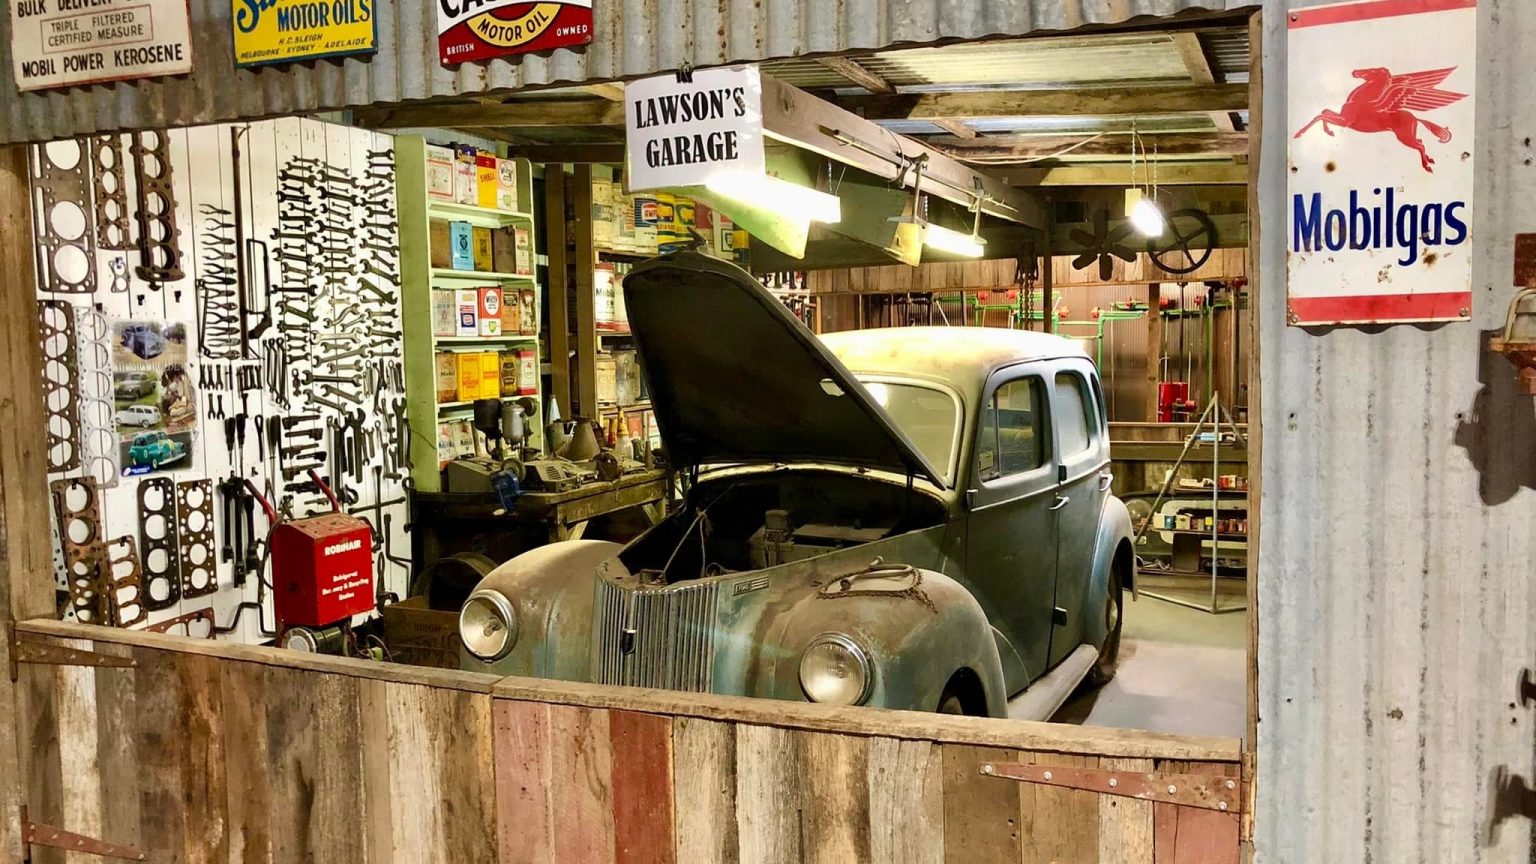 The car and garage are typical scenes of the 40's and 50's in Rupanyup.